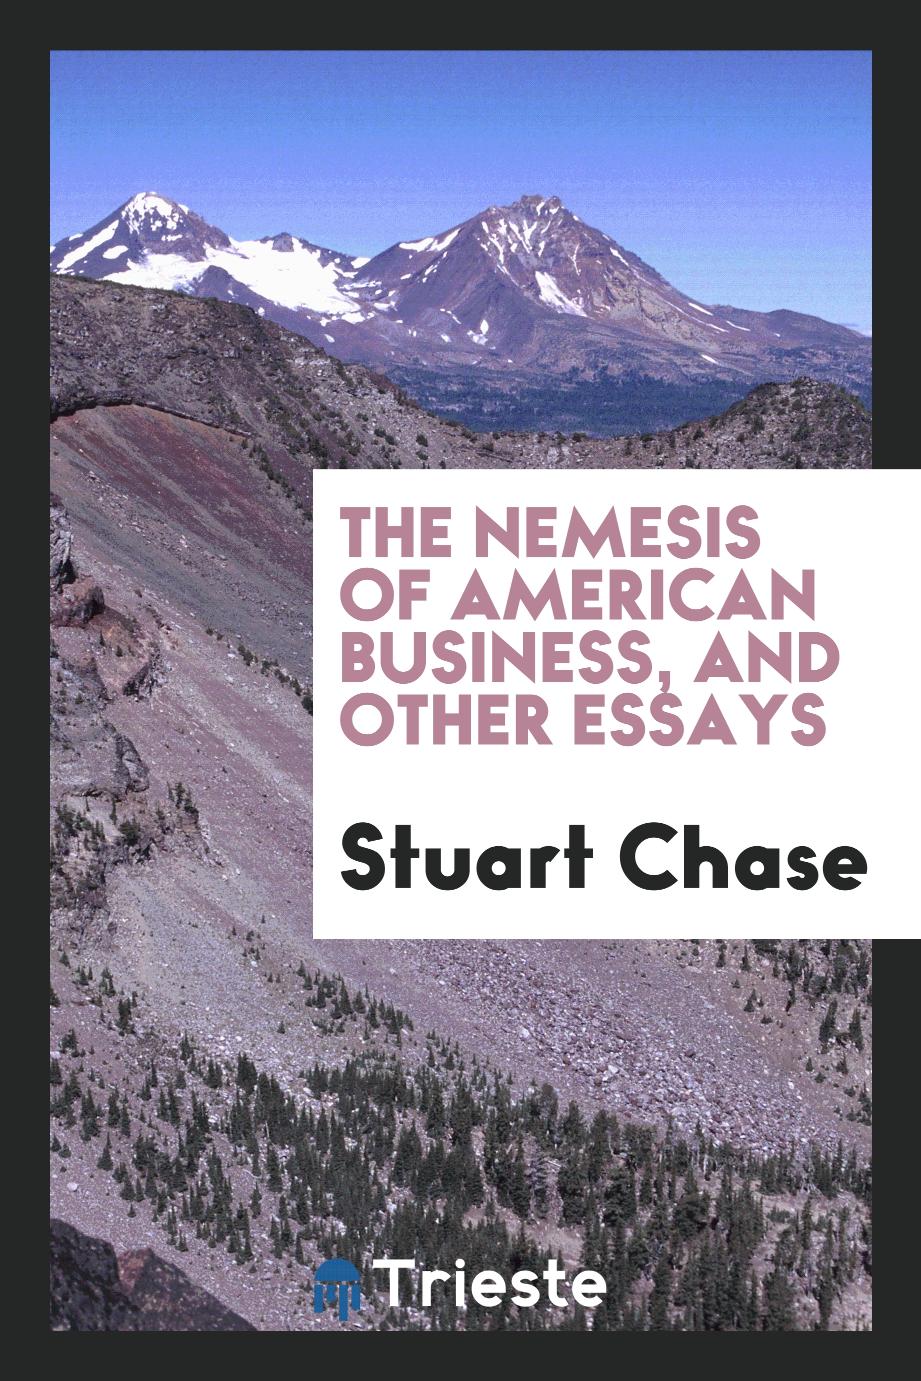 Stuart Chase - The nemesis of American business, and other essays